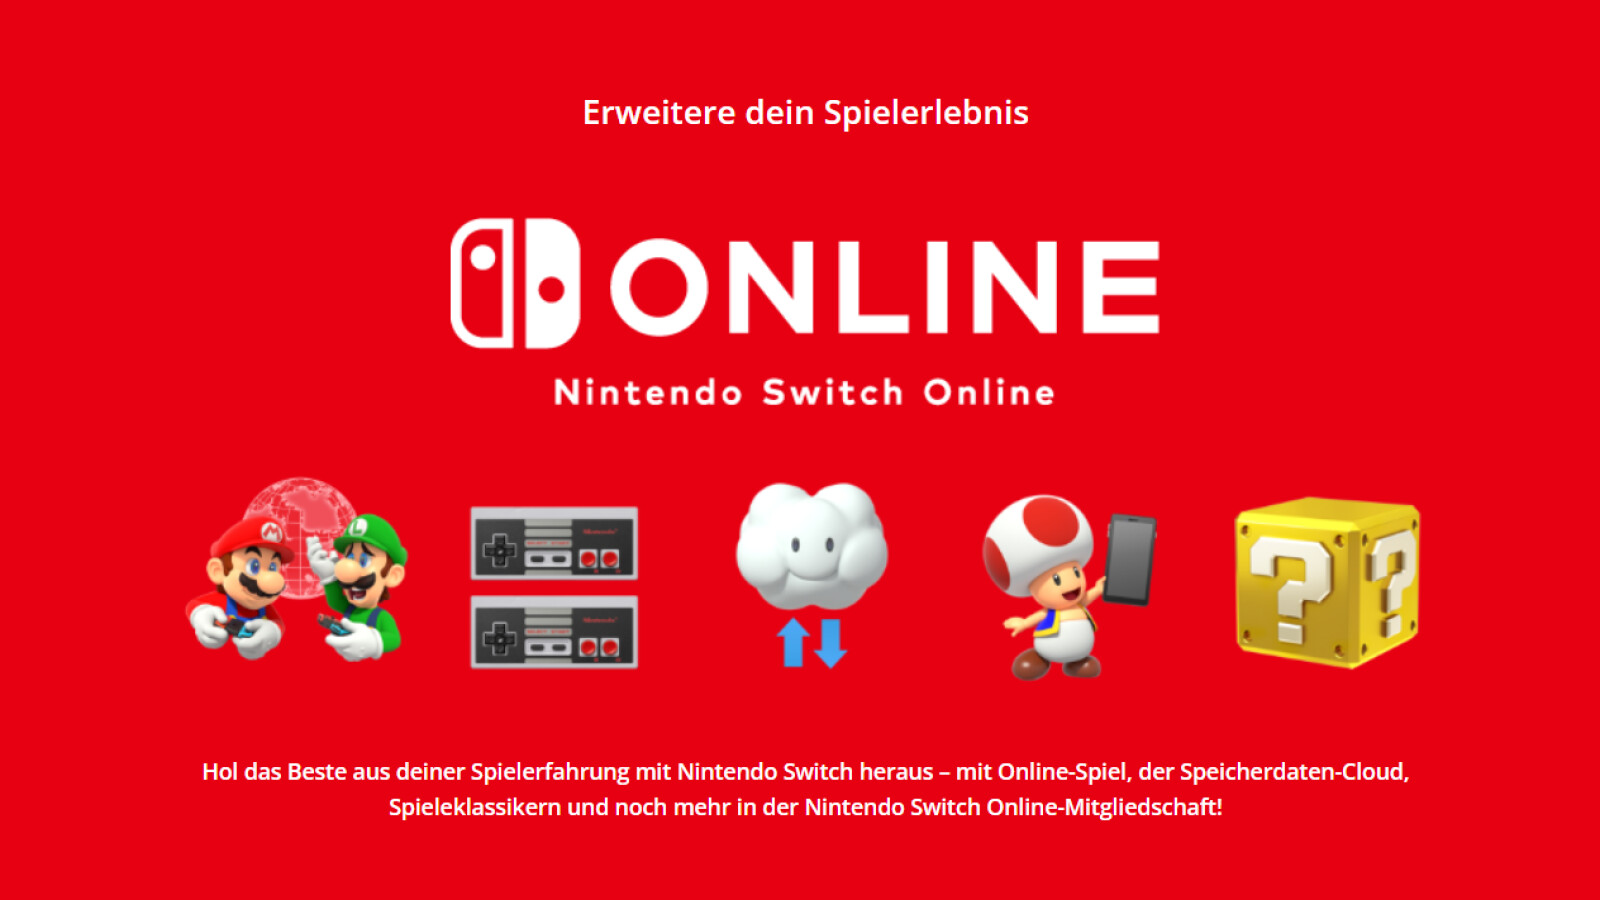 Nintendo Switch Online: This is how many subscribers worldwide